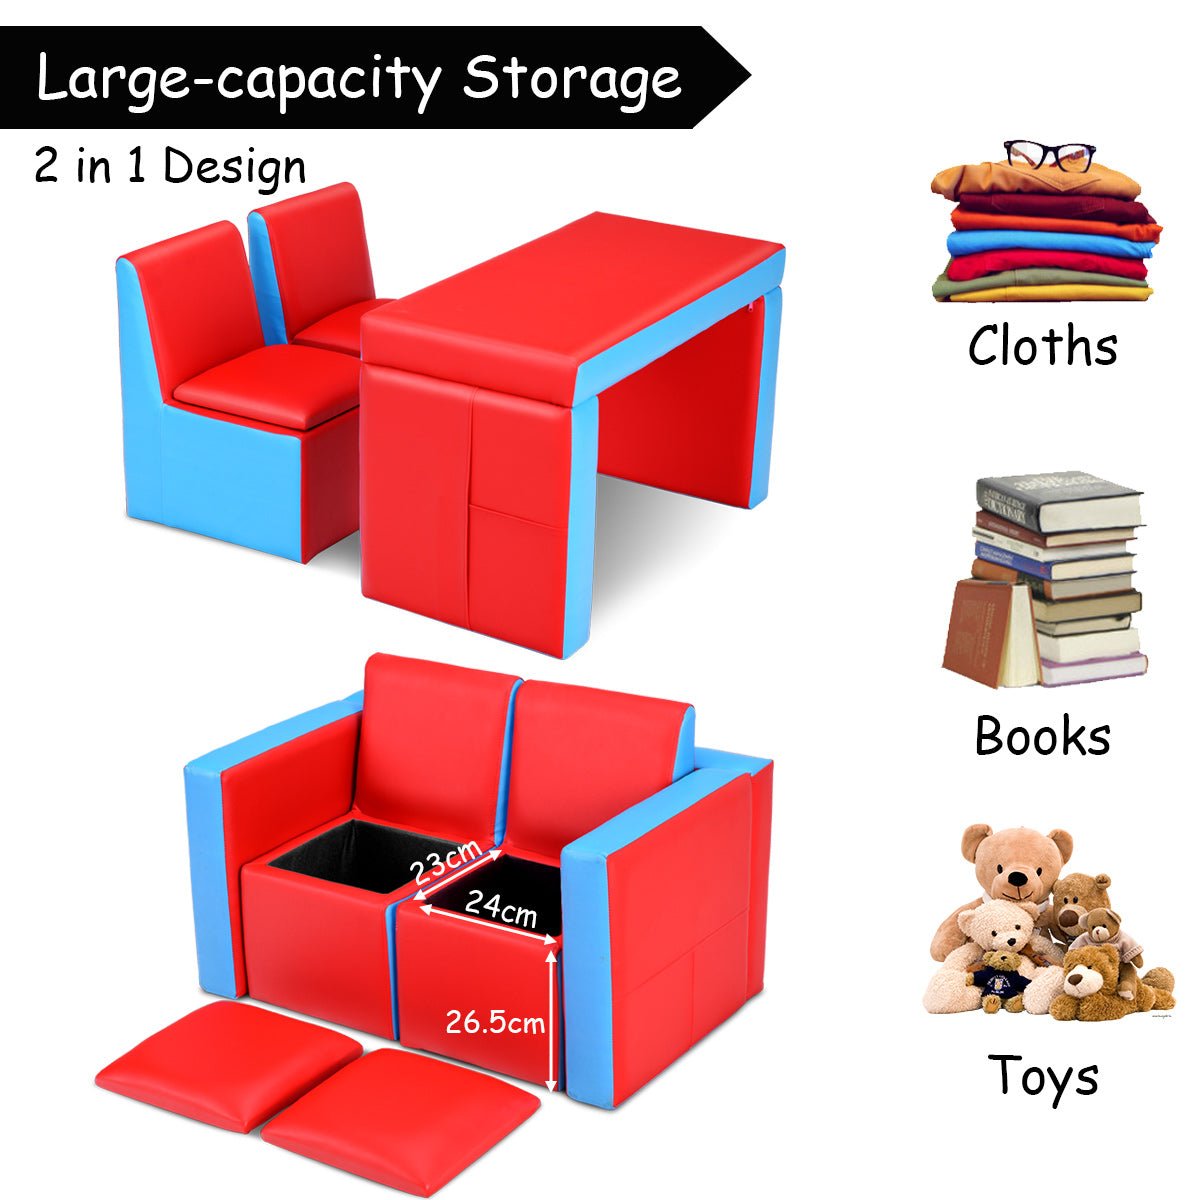 2-in-1 Children's Sofa with Storage Space - Play, Rest, and Stay Organized